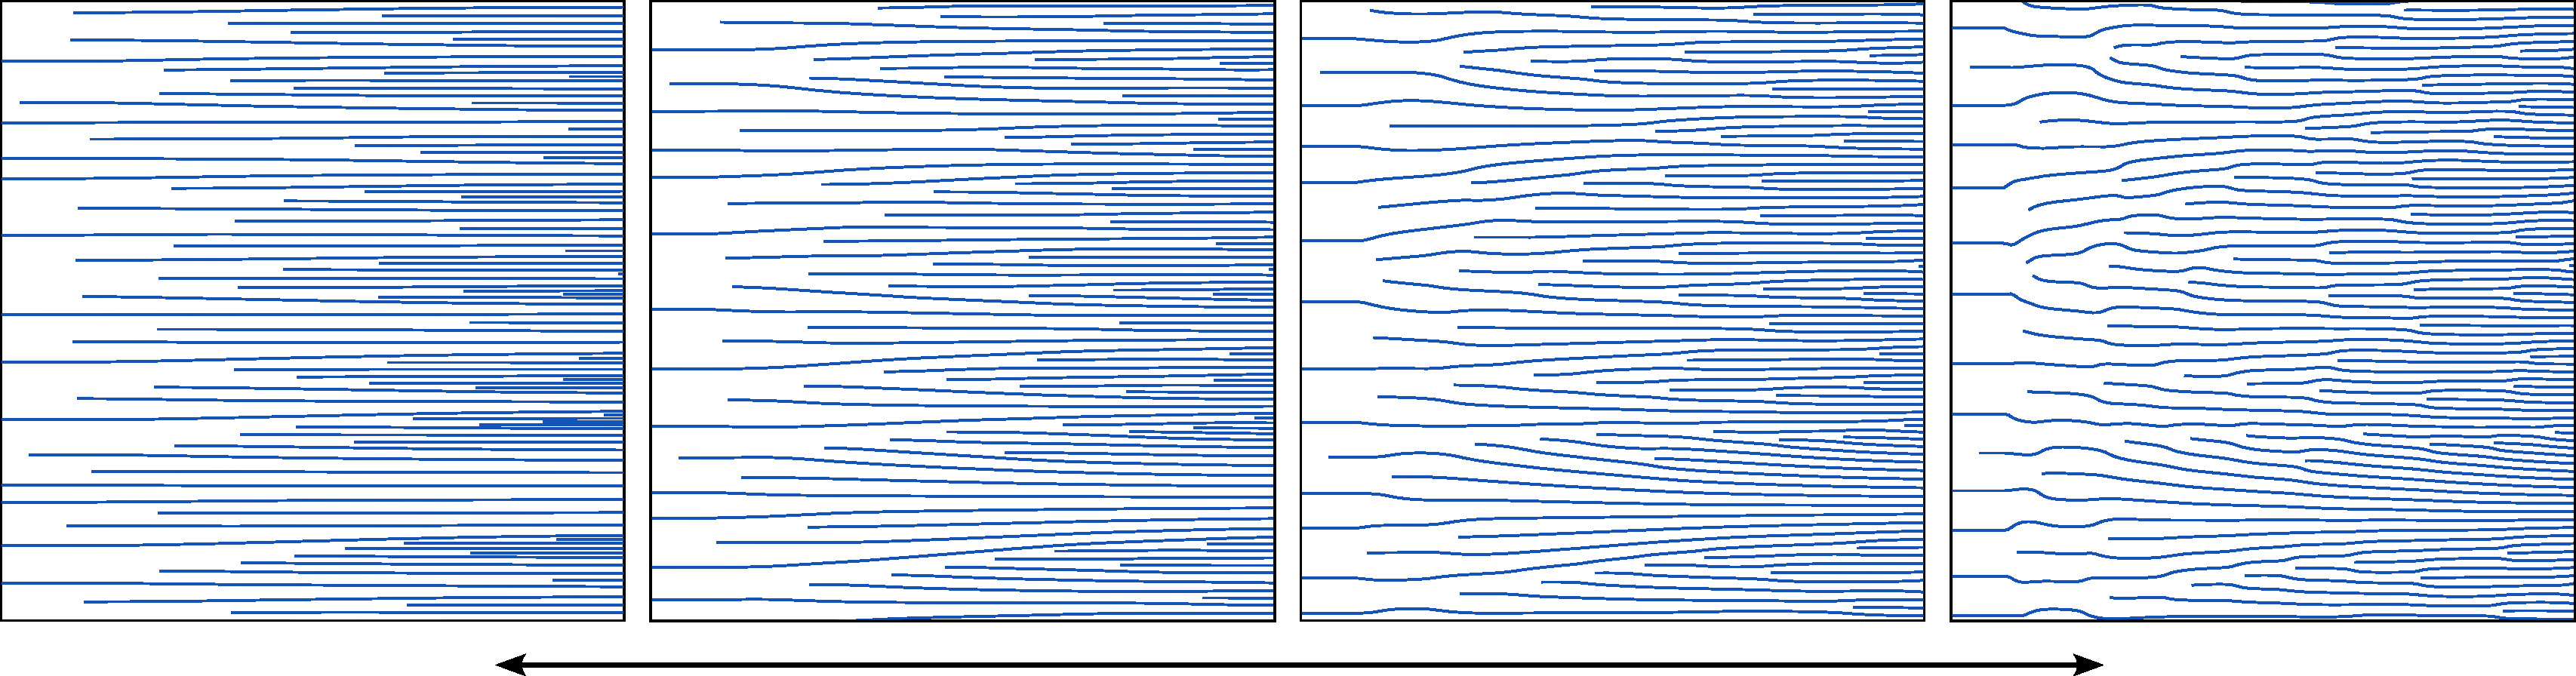 In general, density and direction fields are hard to be approximated perfectly by streamlines.